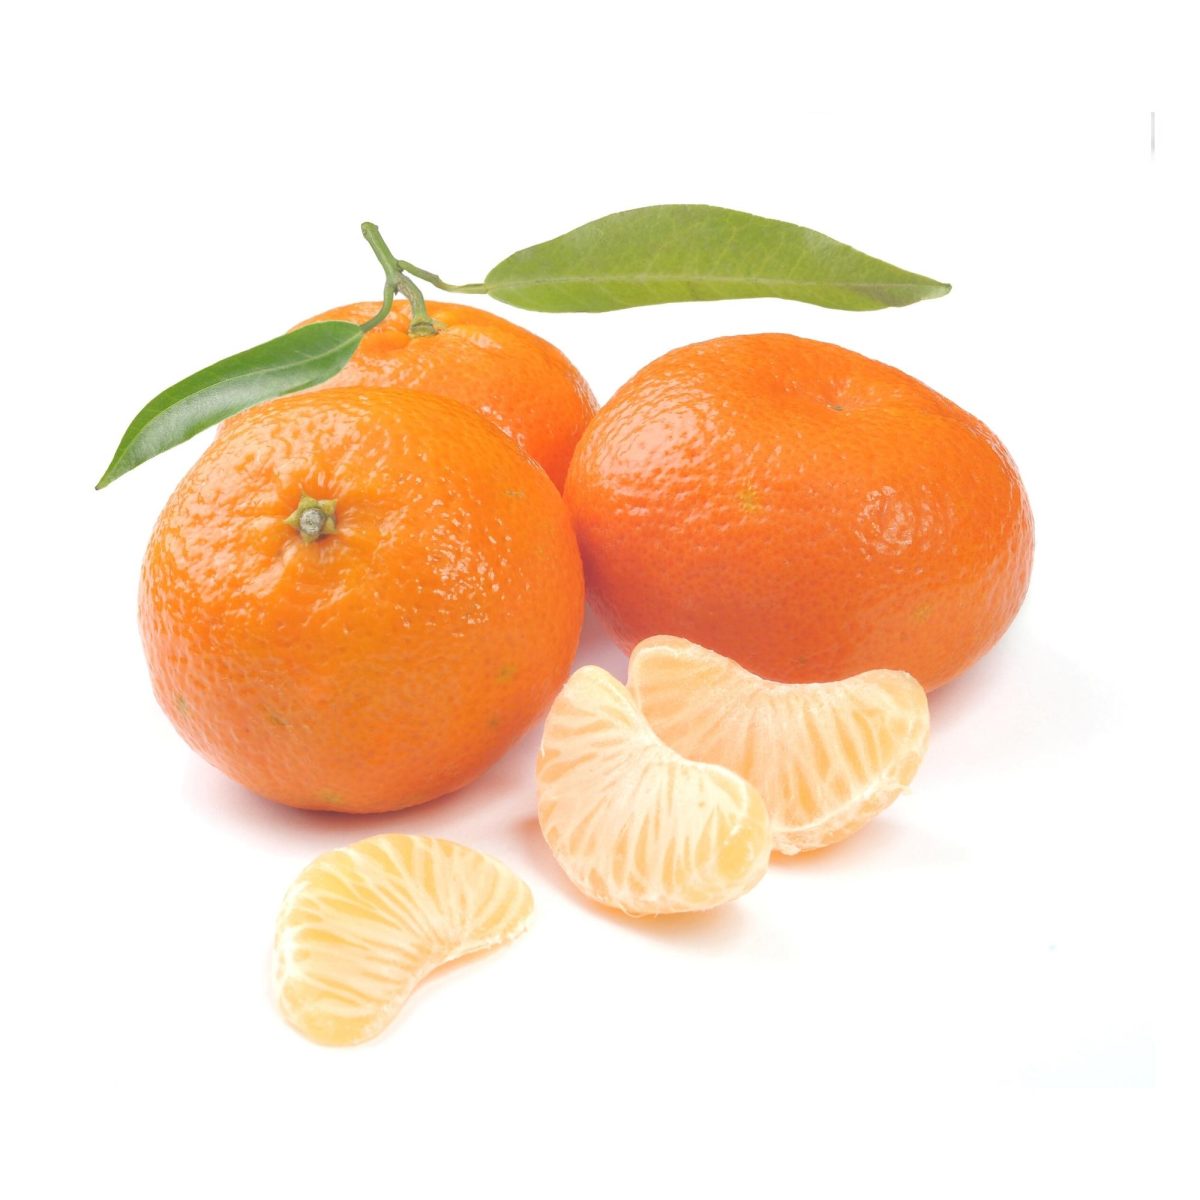 Pieces of Darcy Tangerines and evergreen foliage.s and